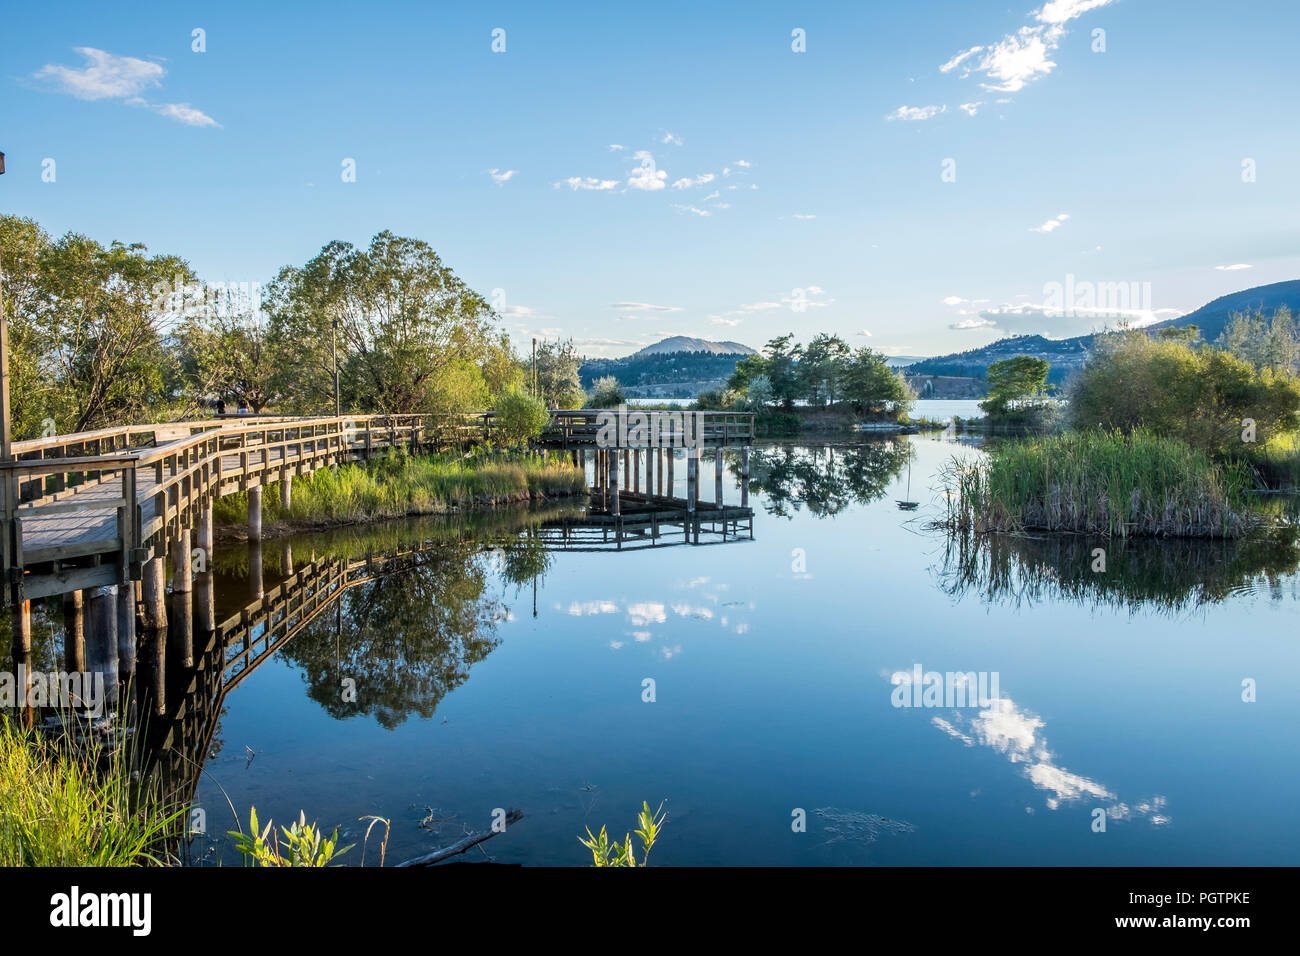 A wood bridge wraps along the edge of a pond reflecting in the calm waters in Kelowna British Columbia. Stock Photo